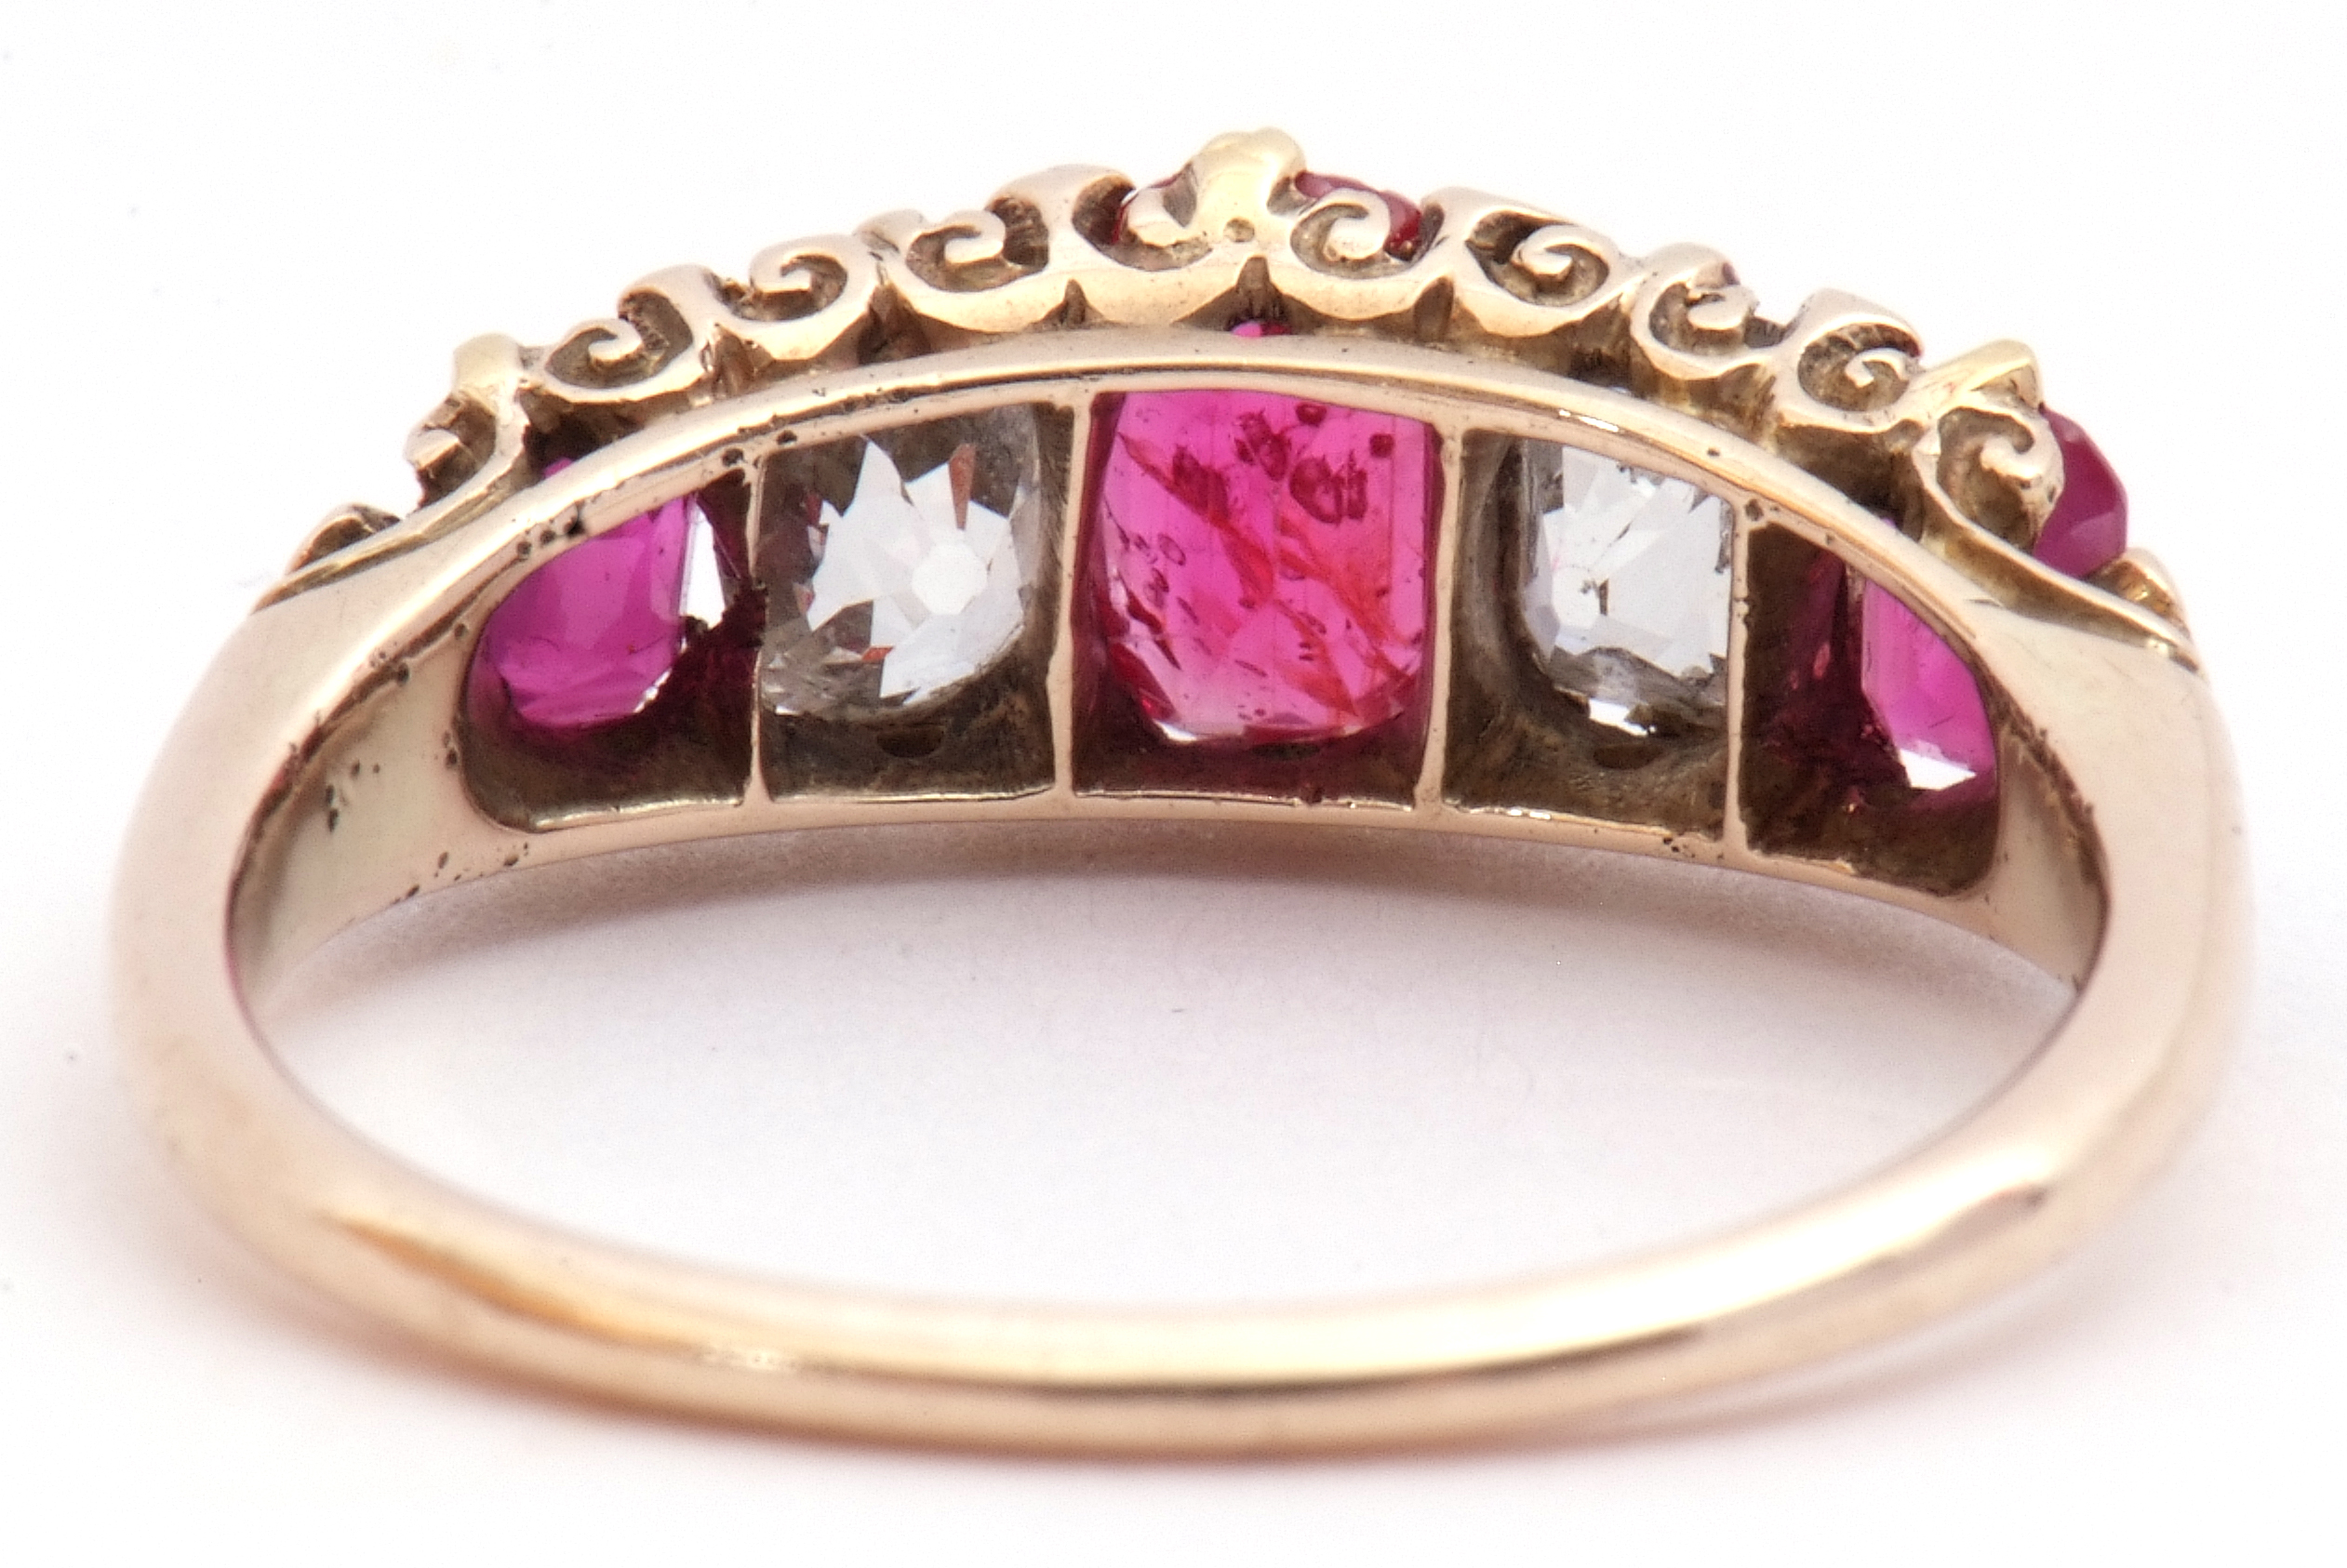 Ruby and diamond five stone ring, an alternate design featuring three graduated cushion cut rubies - Image 4 of 8